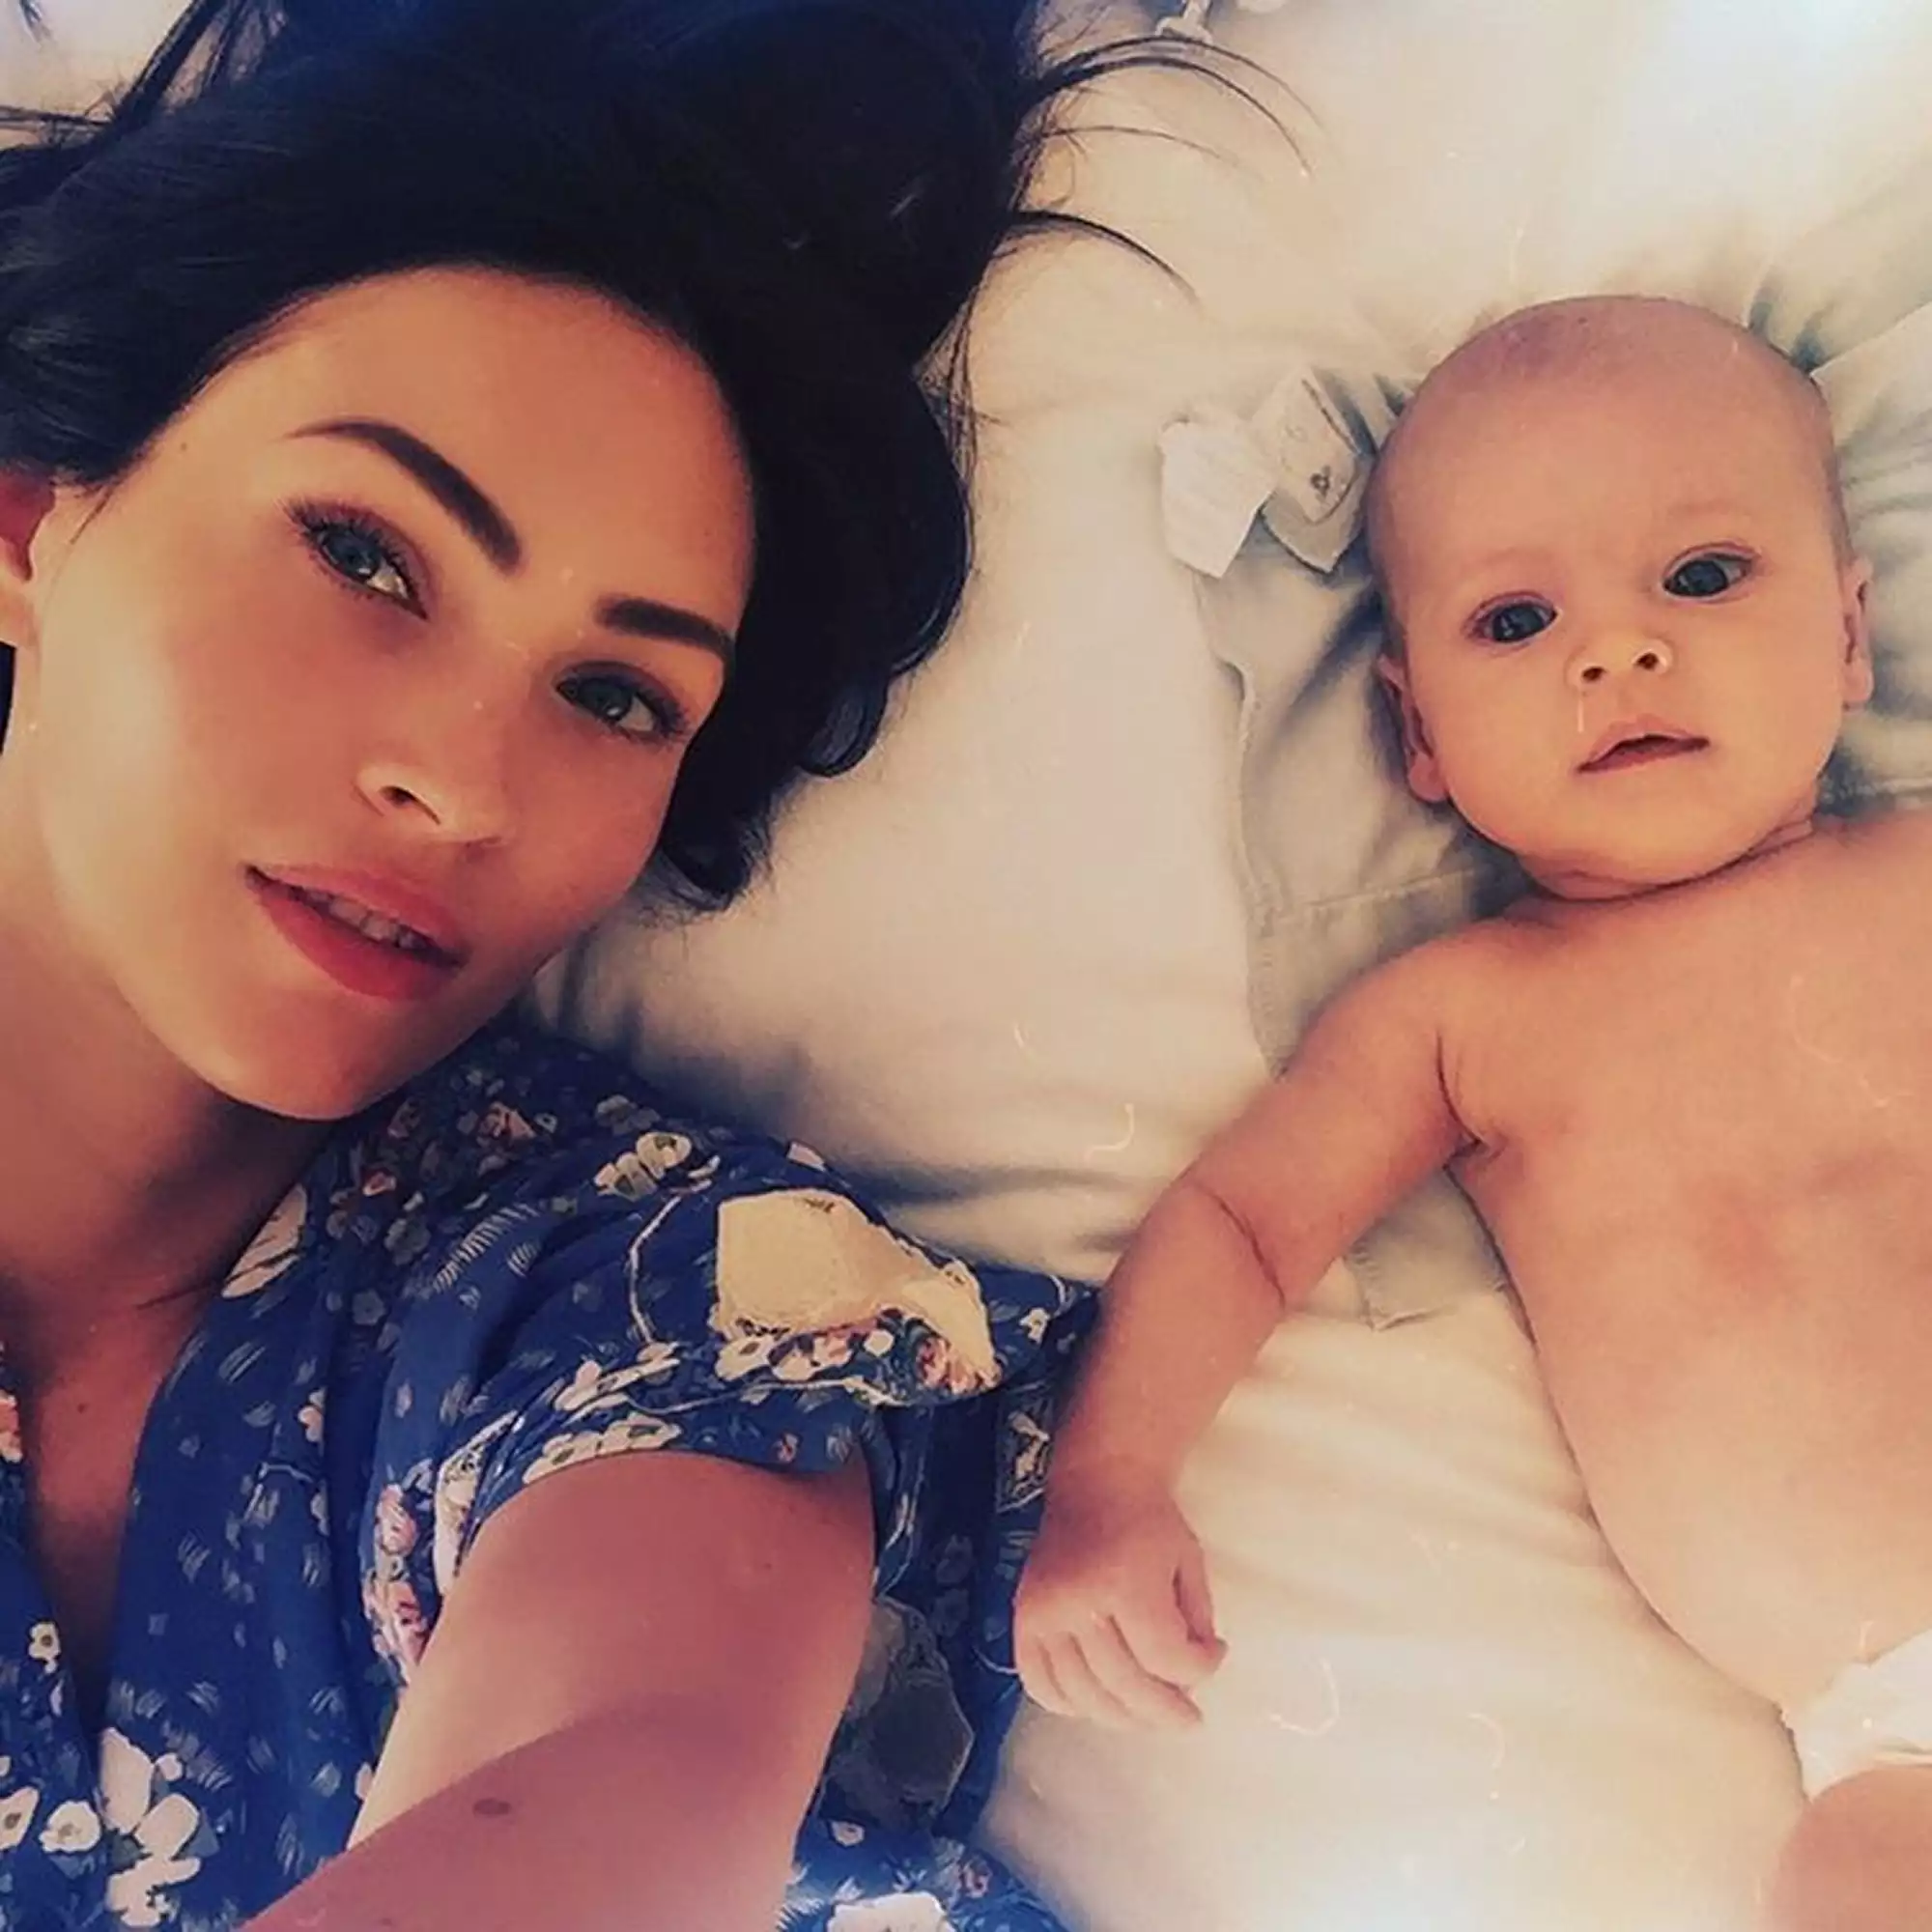 Megan Fox's first photo of her then 3-month-old son Journey.